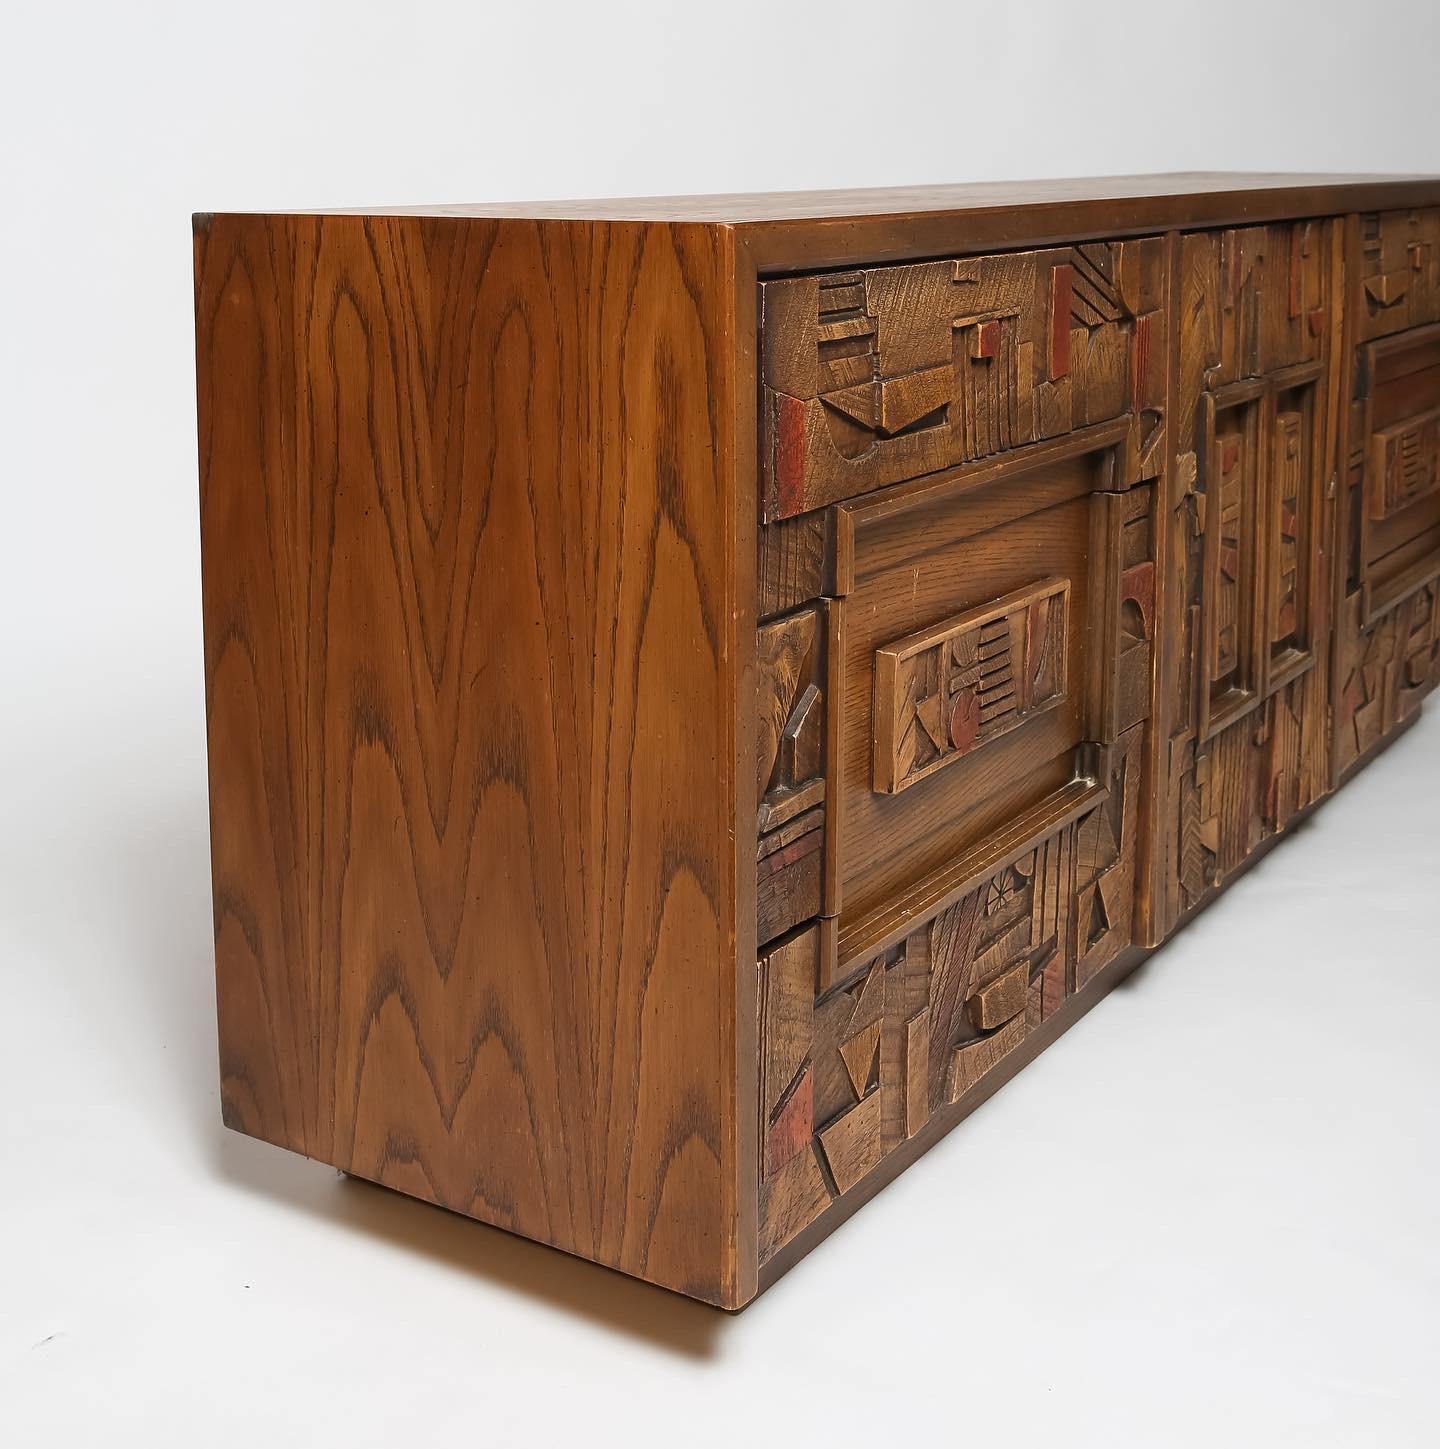 Brutalist 9-drawer dresser from the “Pueblo” line by Lane. Constructed of stained oak with fantastic resin relief panels aligned at drawer fronts creating a statement piece suitable for a variety of spaces. In very good vintage condition. Lots of